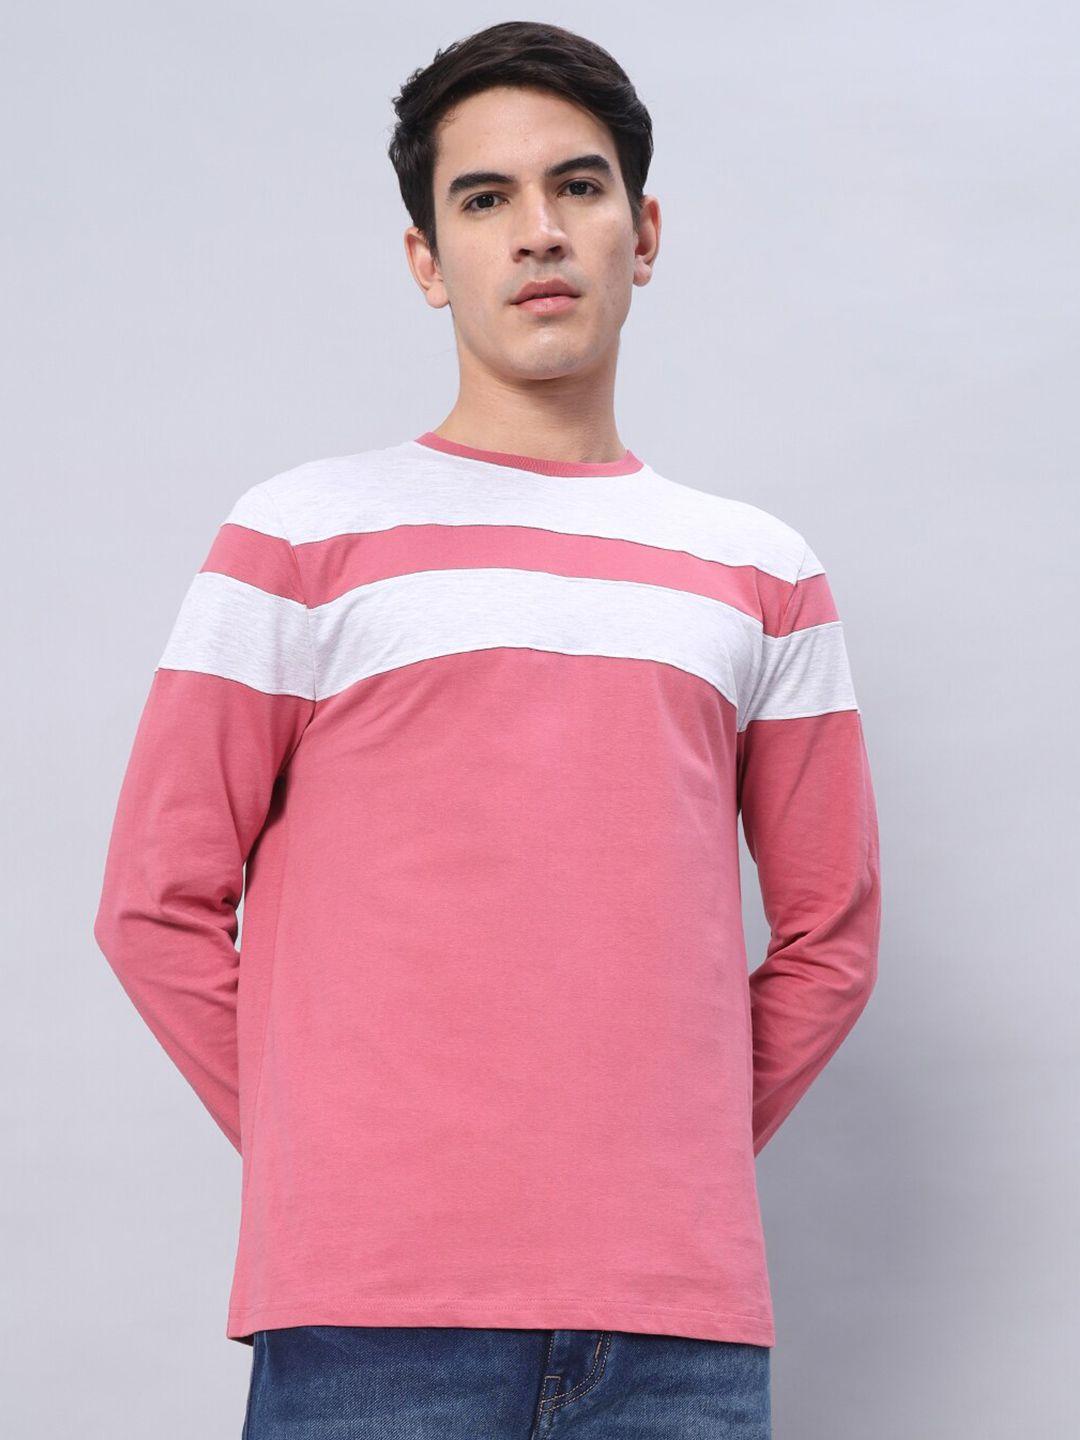 the dry state rose & white colourblocked cotton t-shirt